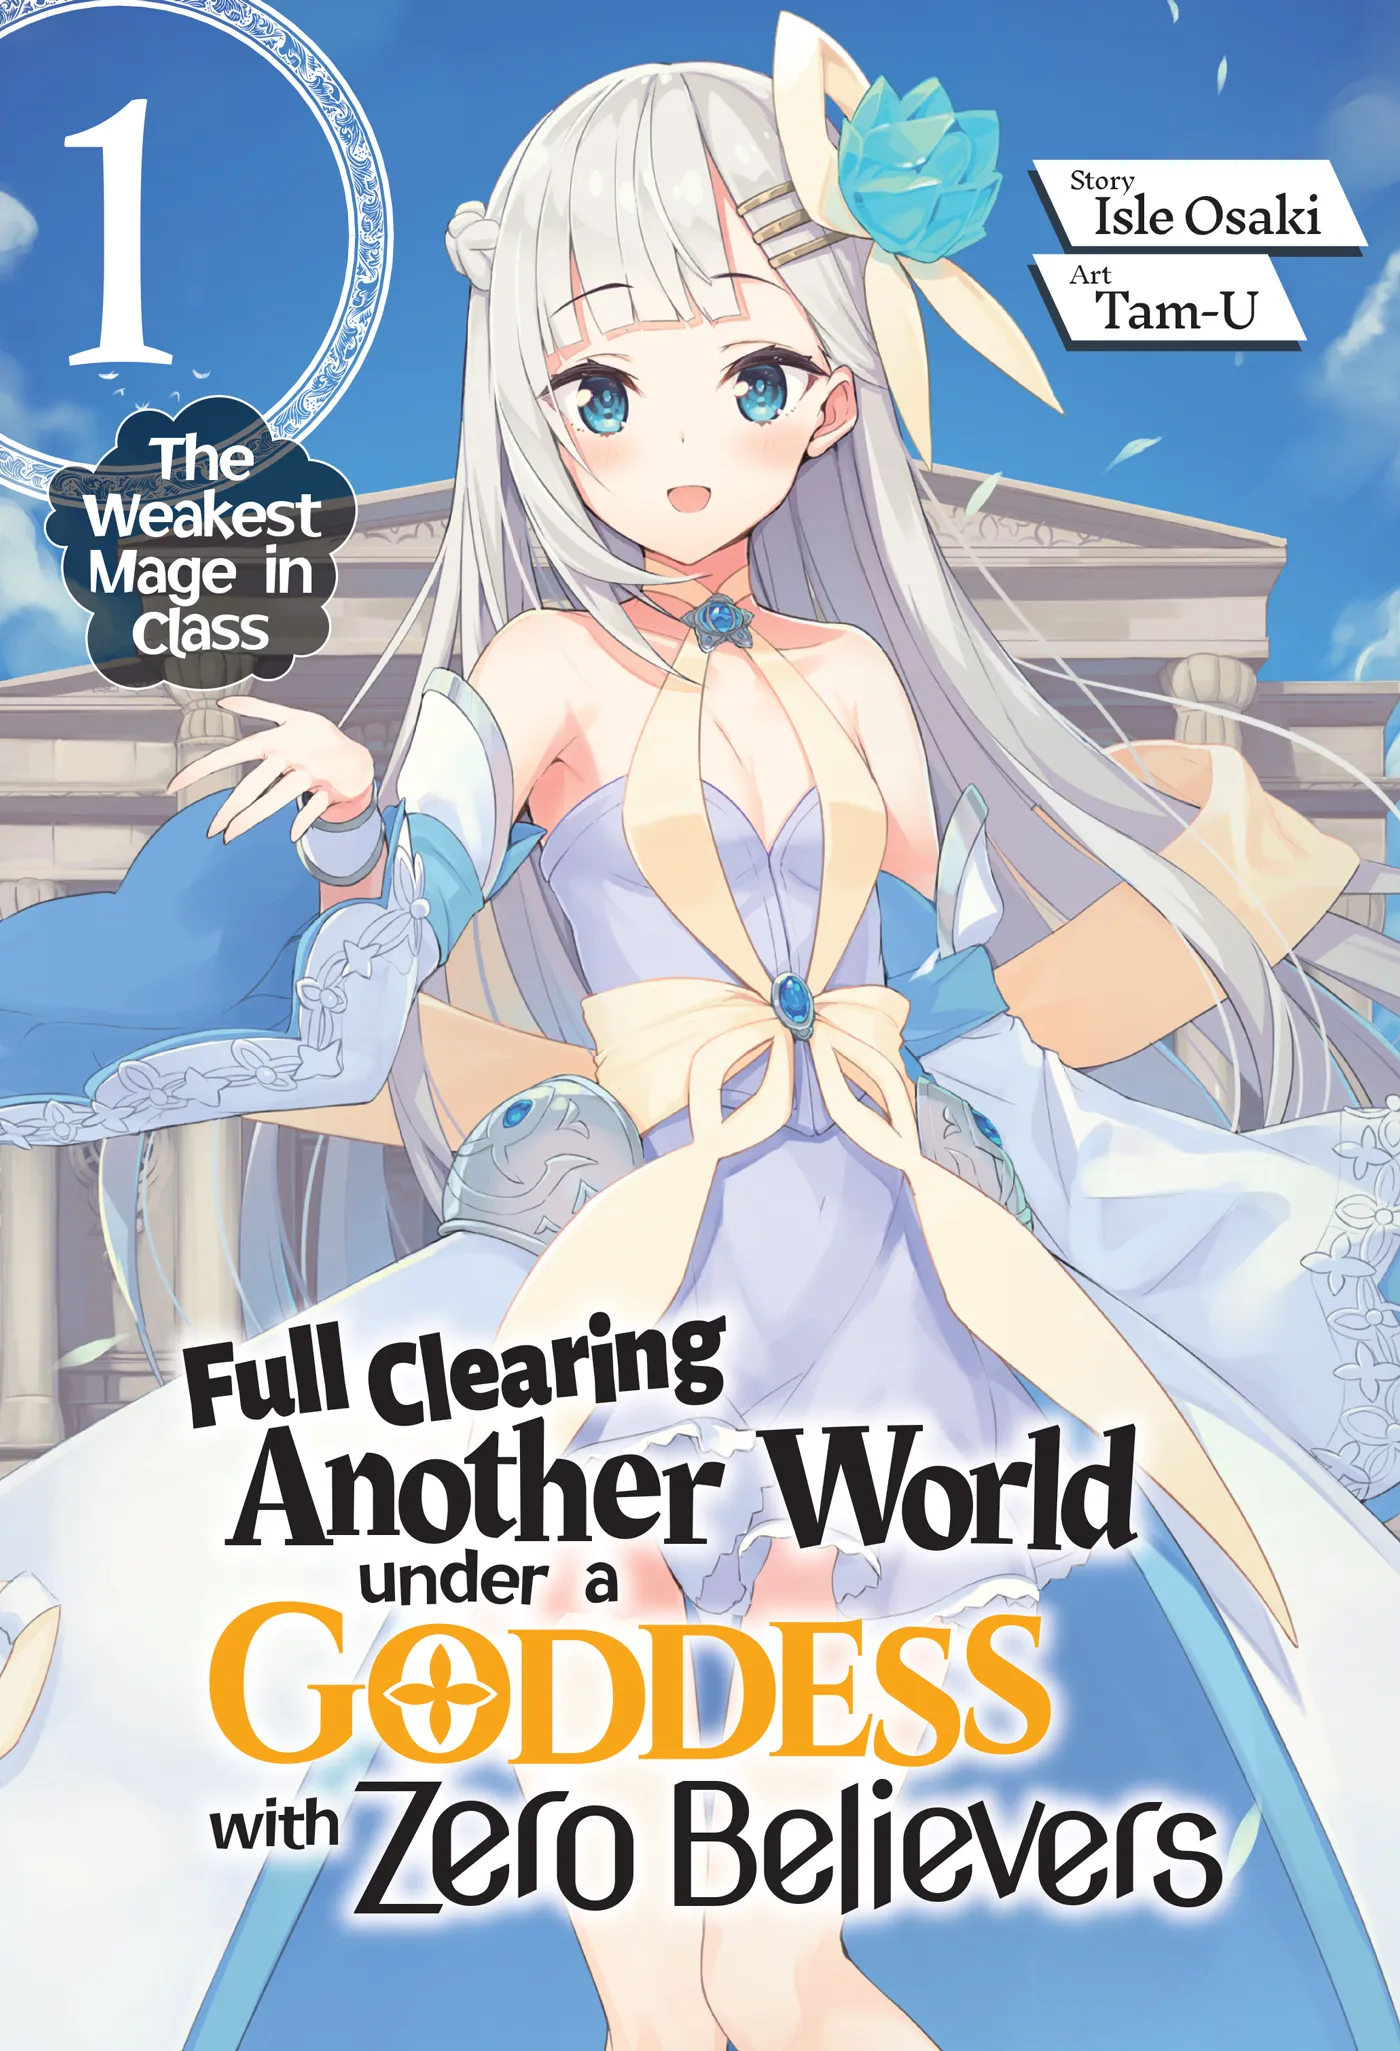 Full Clearing Another World under a Goddess with Zero Believers- J Novel Club